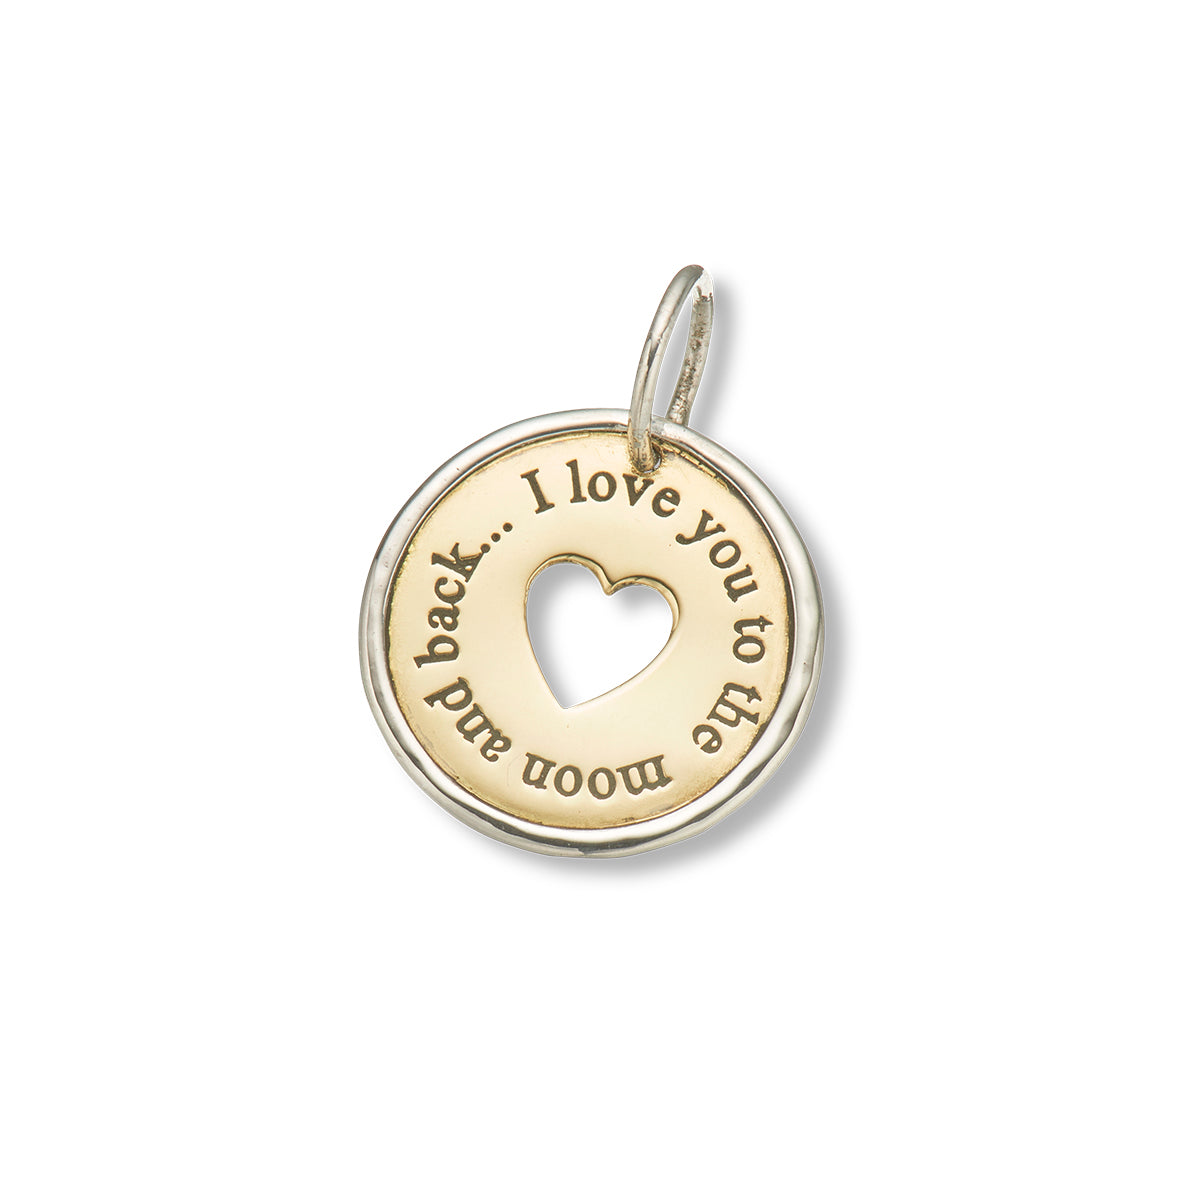 I love you to the moon and back charm